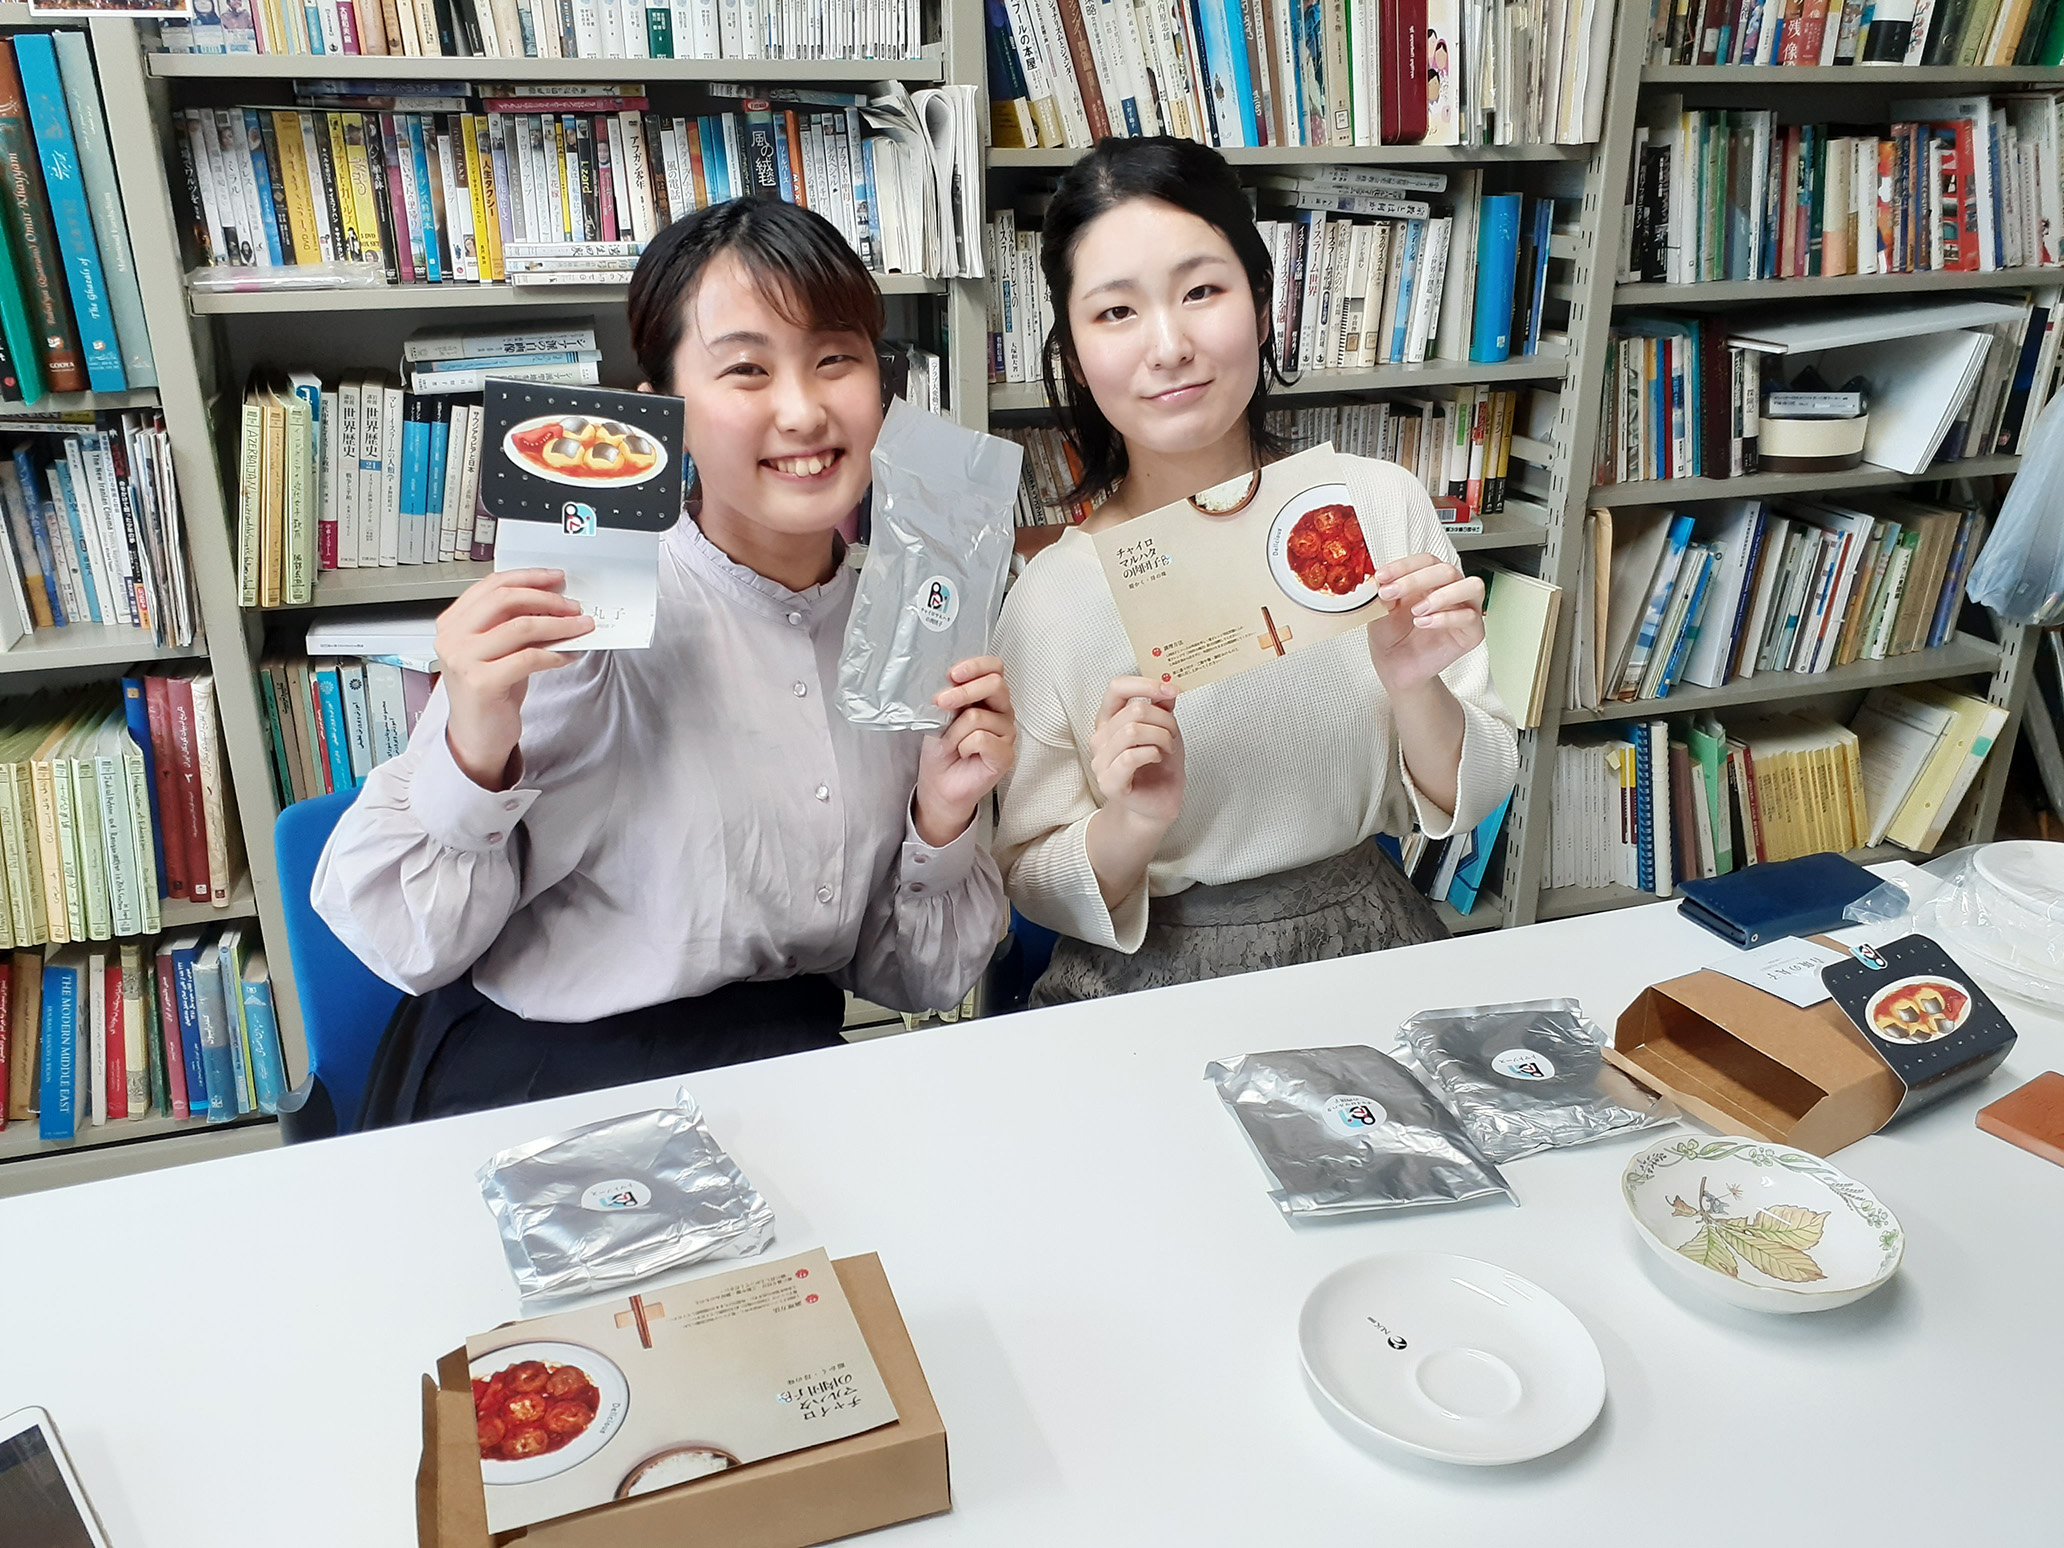 You are currently viewing 地域の食材を利用した食品開発を通して大学と地域の連携について考える